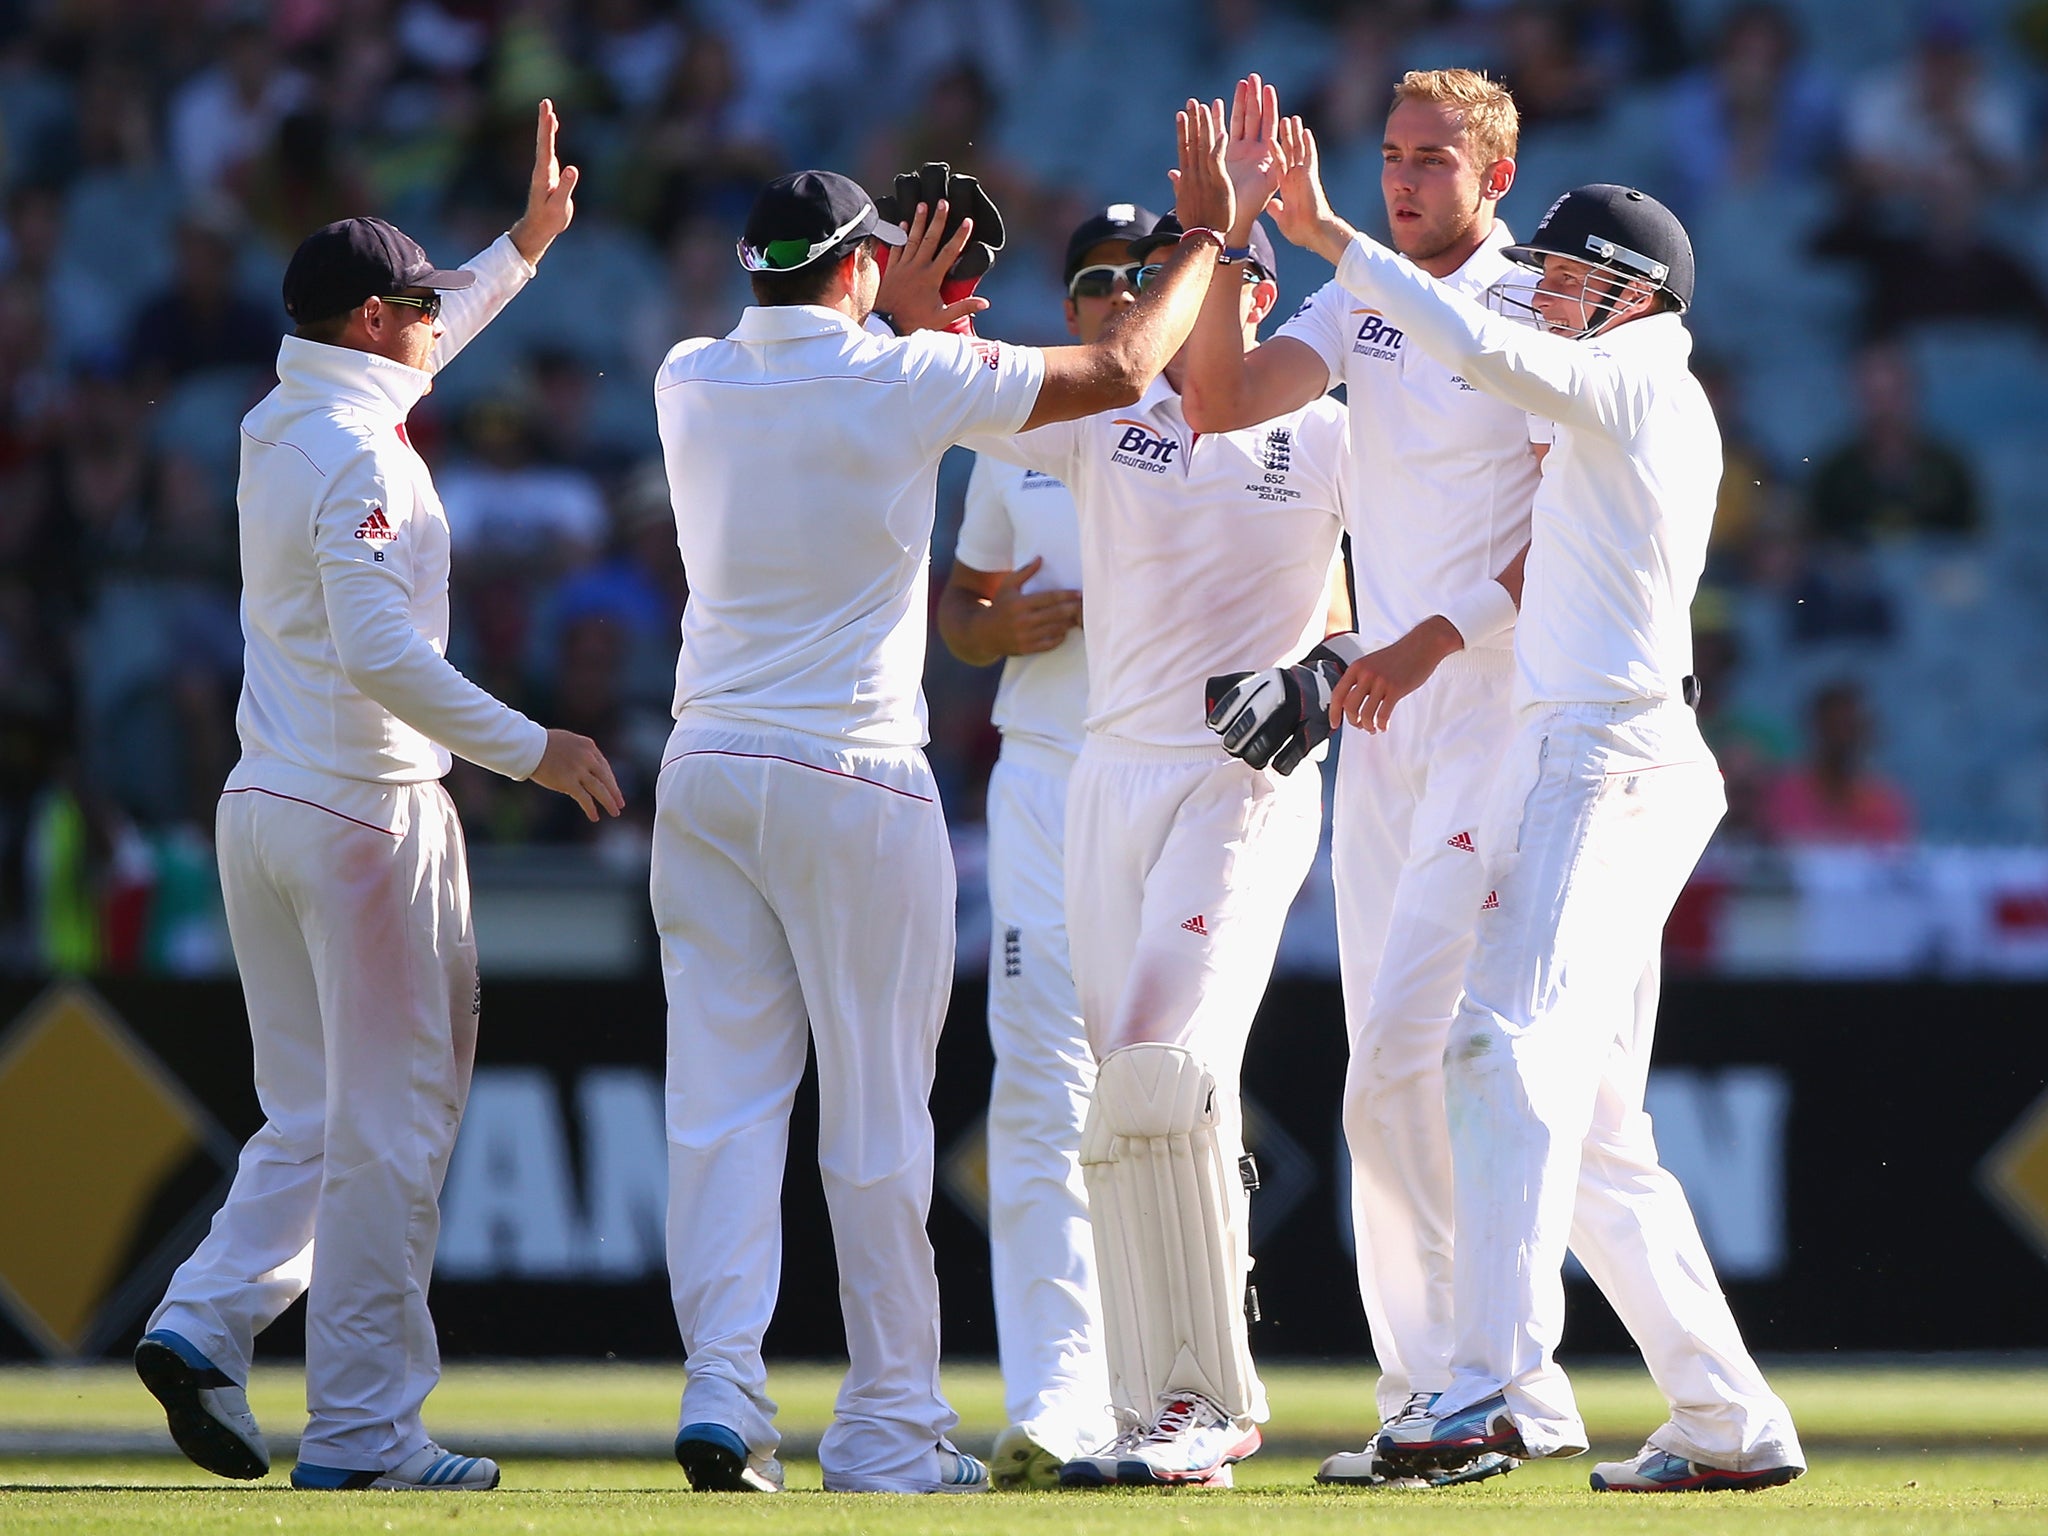 England celebrate after Stuart Broad takes the wicket of Peter Siddle in the Fourth Ashes Test